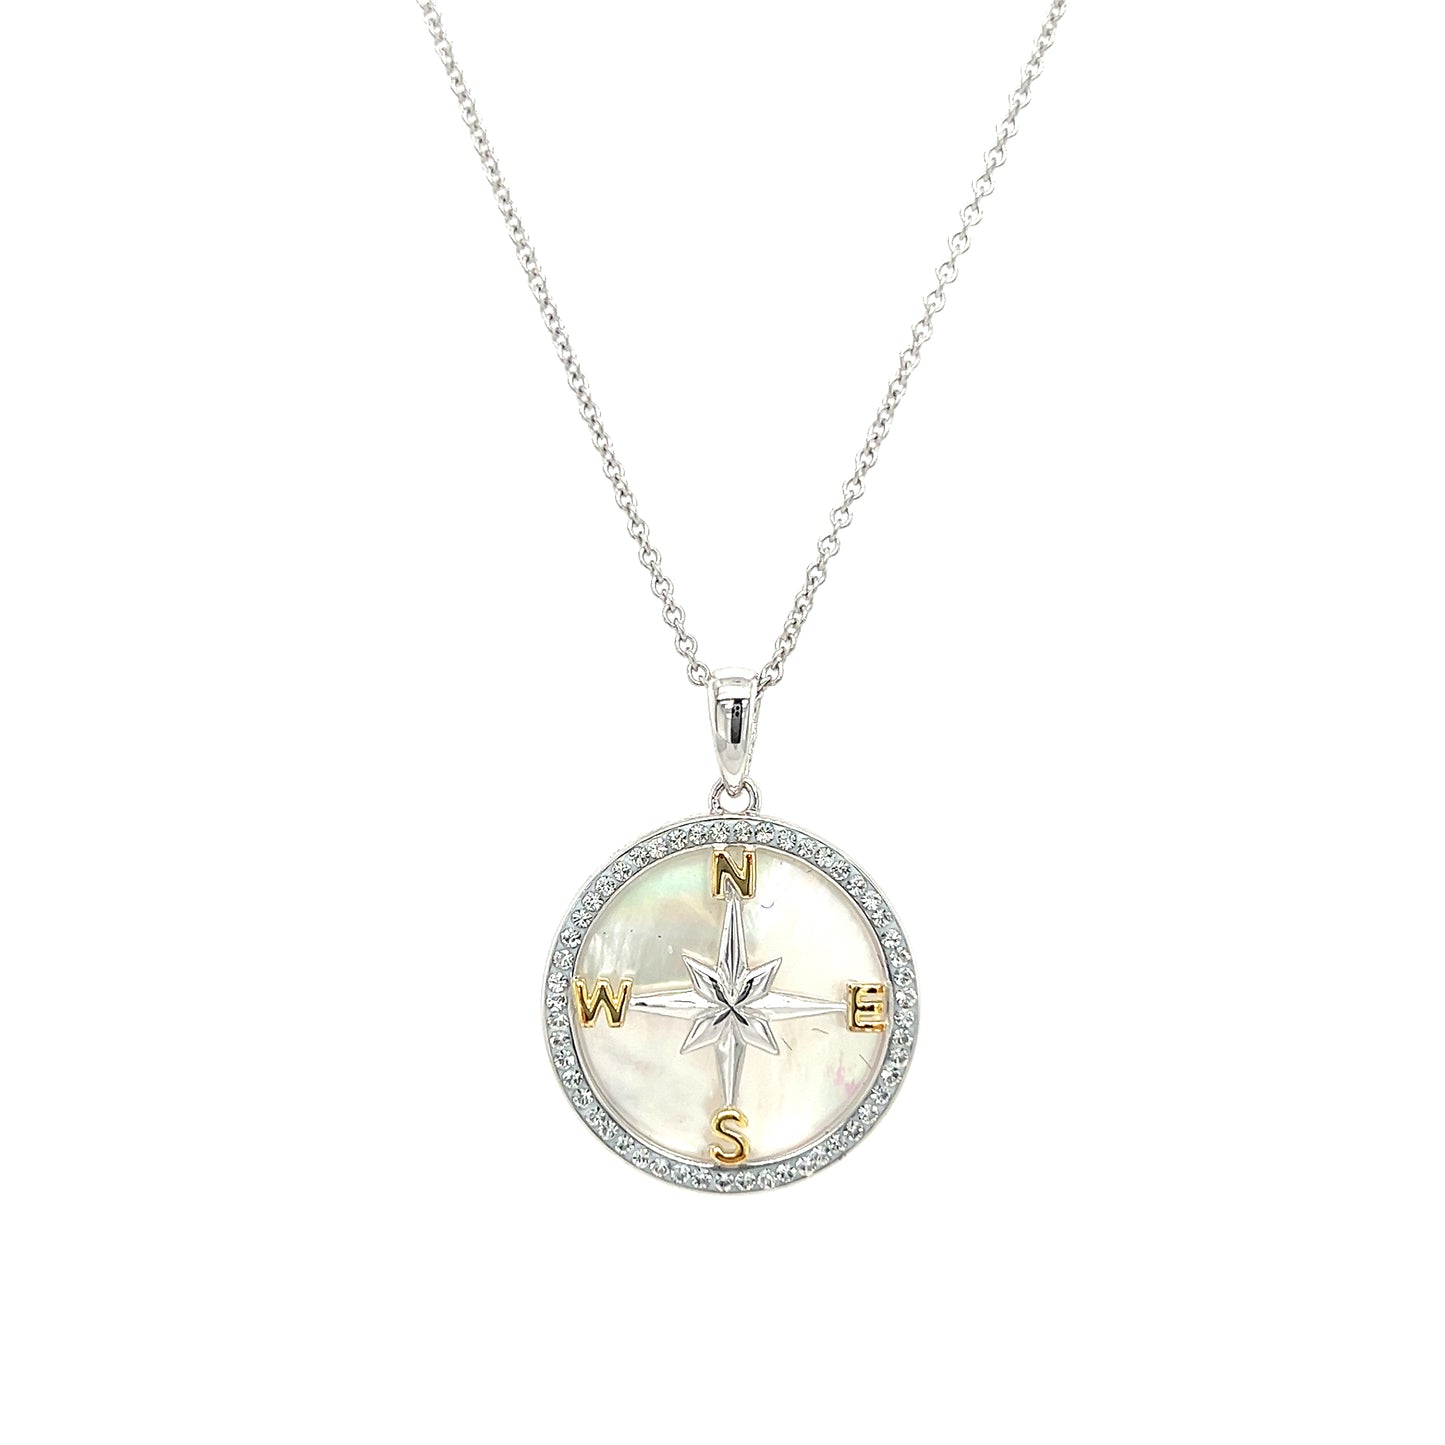 Mother of Pearl Compass Necklace with White Crystals in Sterling Silver